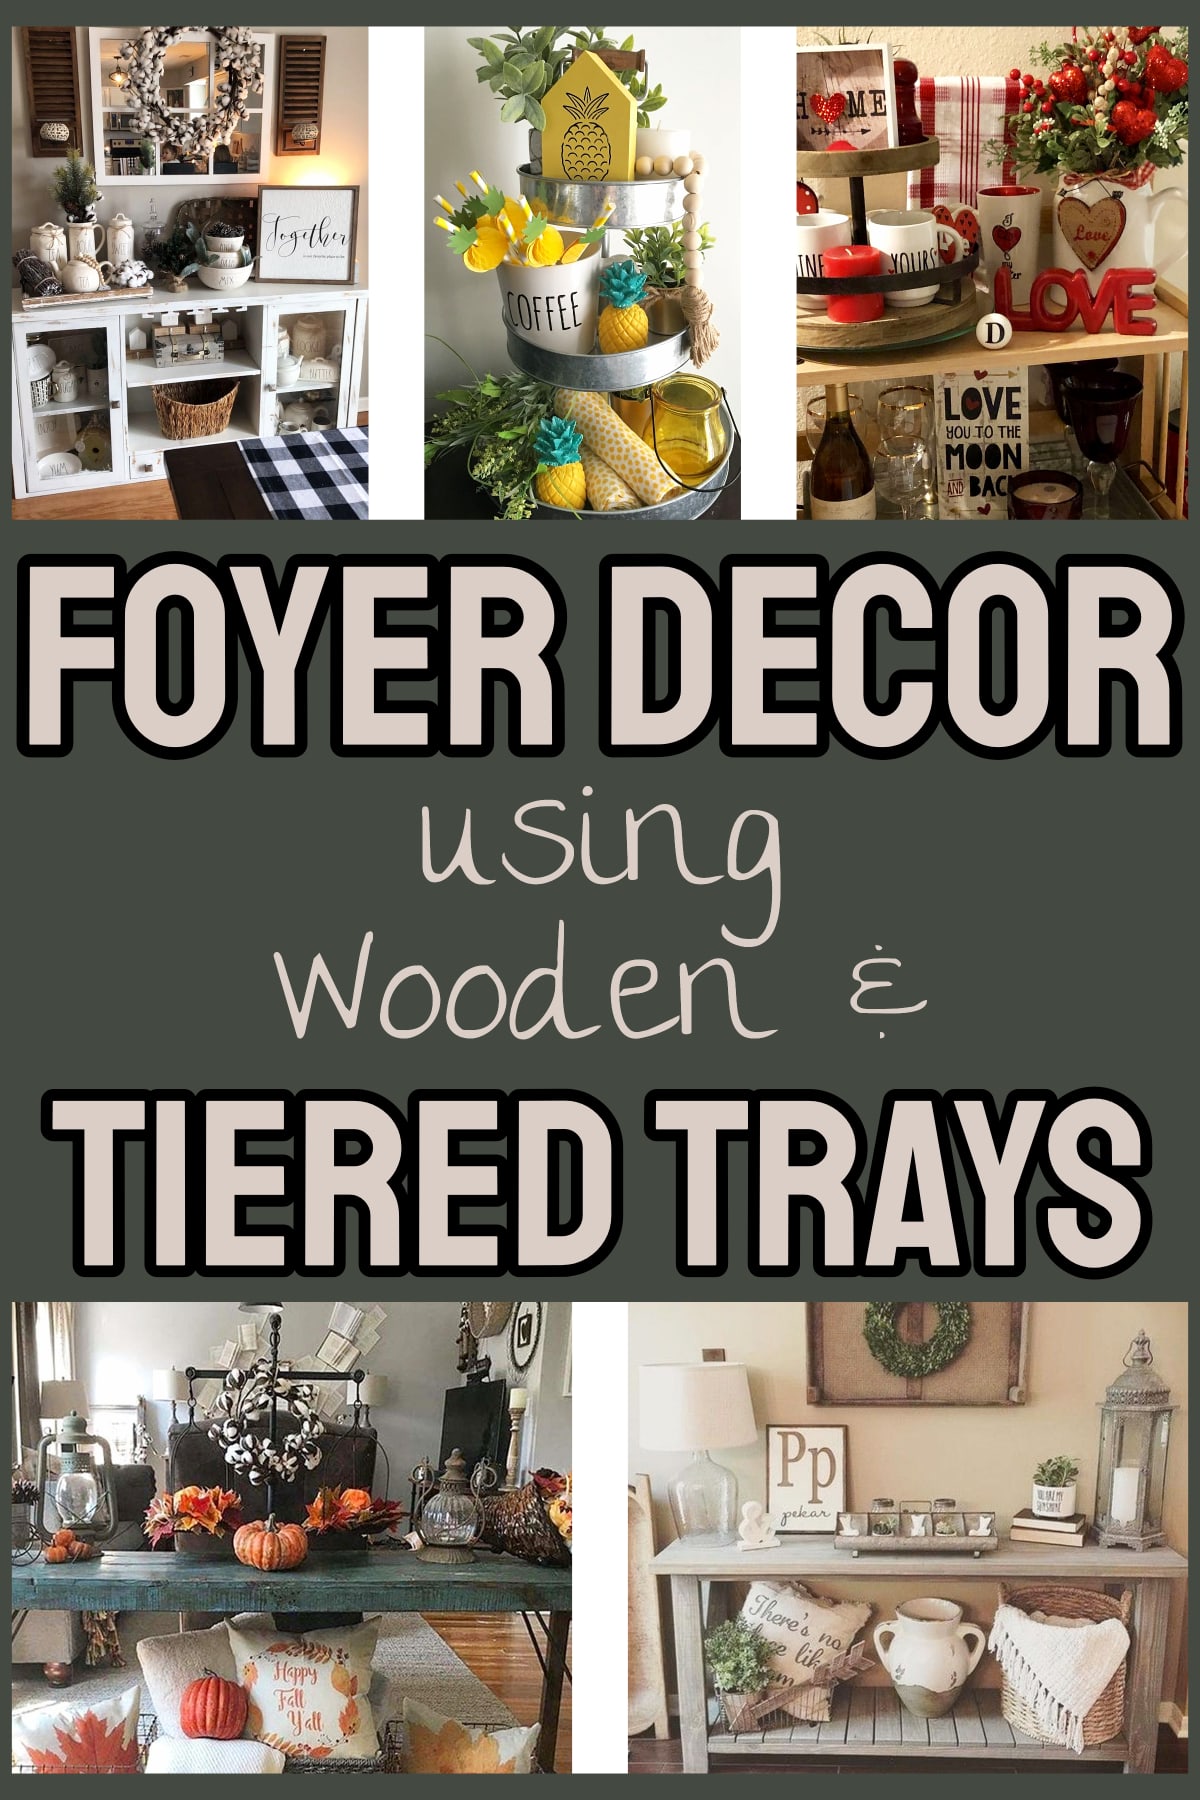 Foyer decor using tiered trays, wooden trays and table trays for decorations